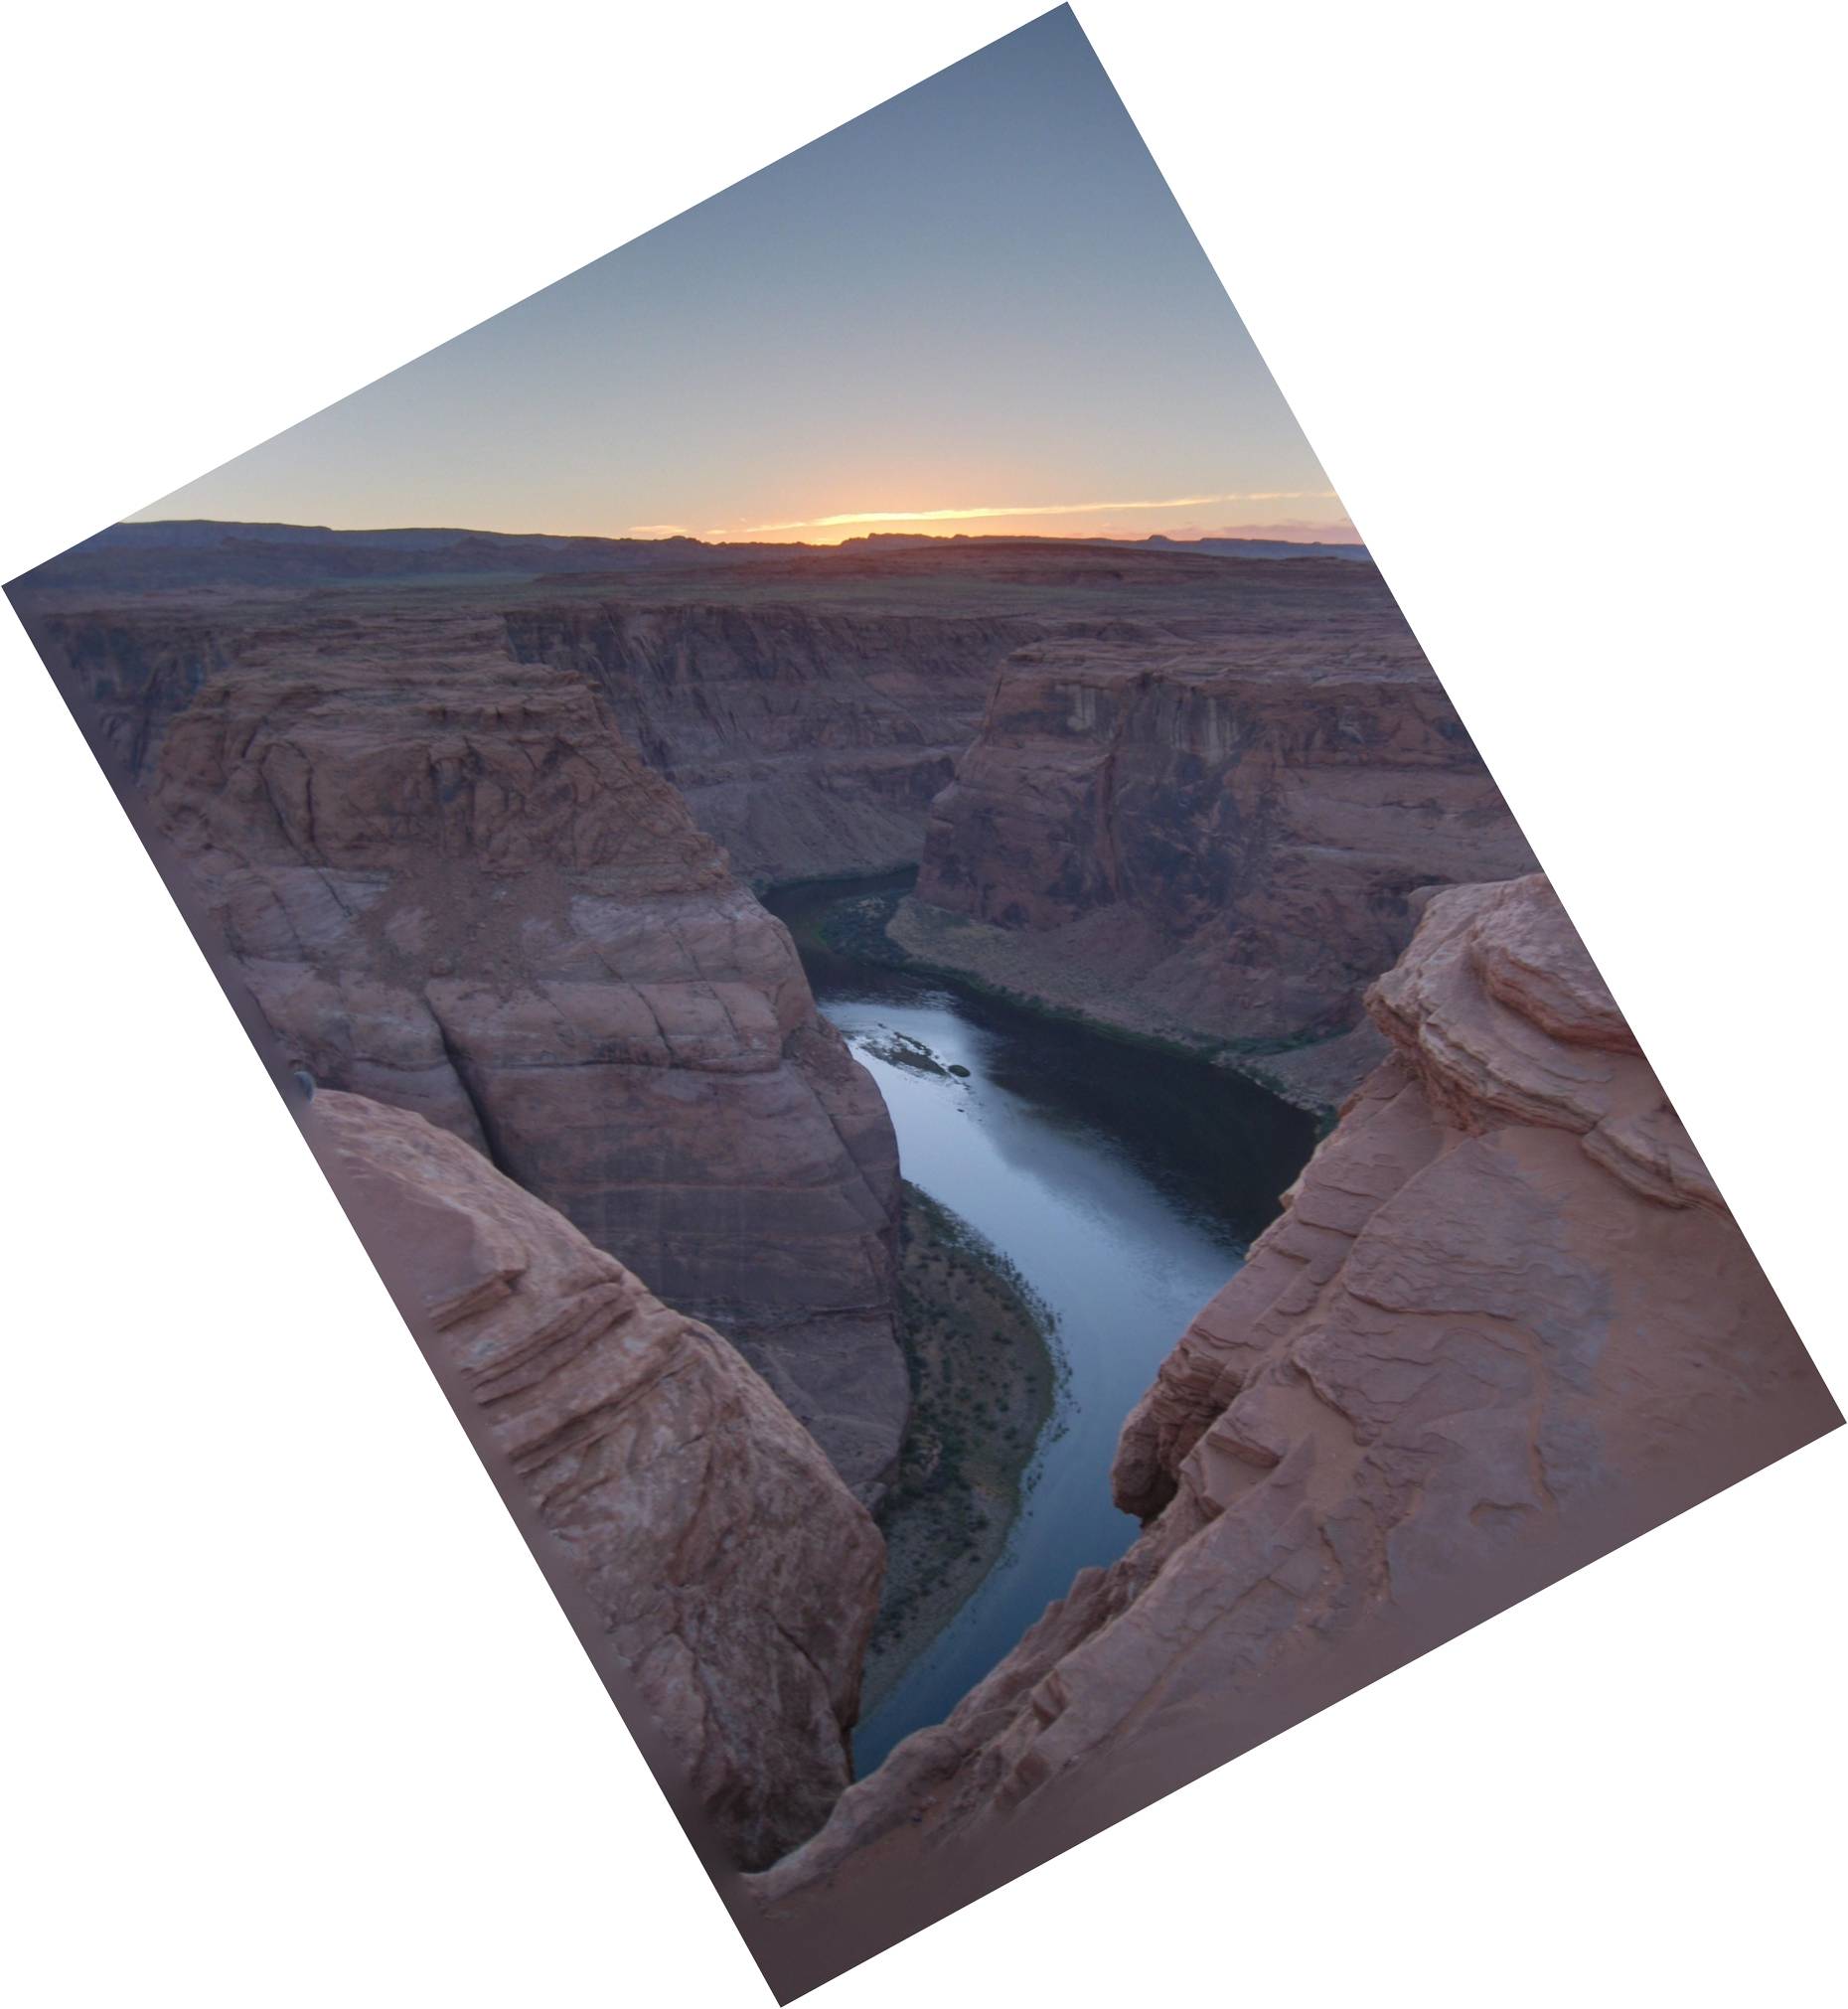 Image: A sunset at the Horseshoe Bend